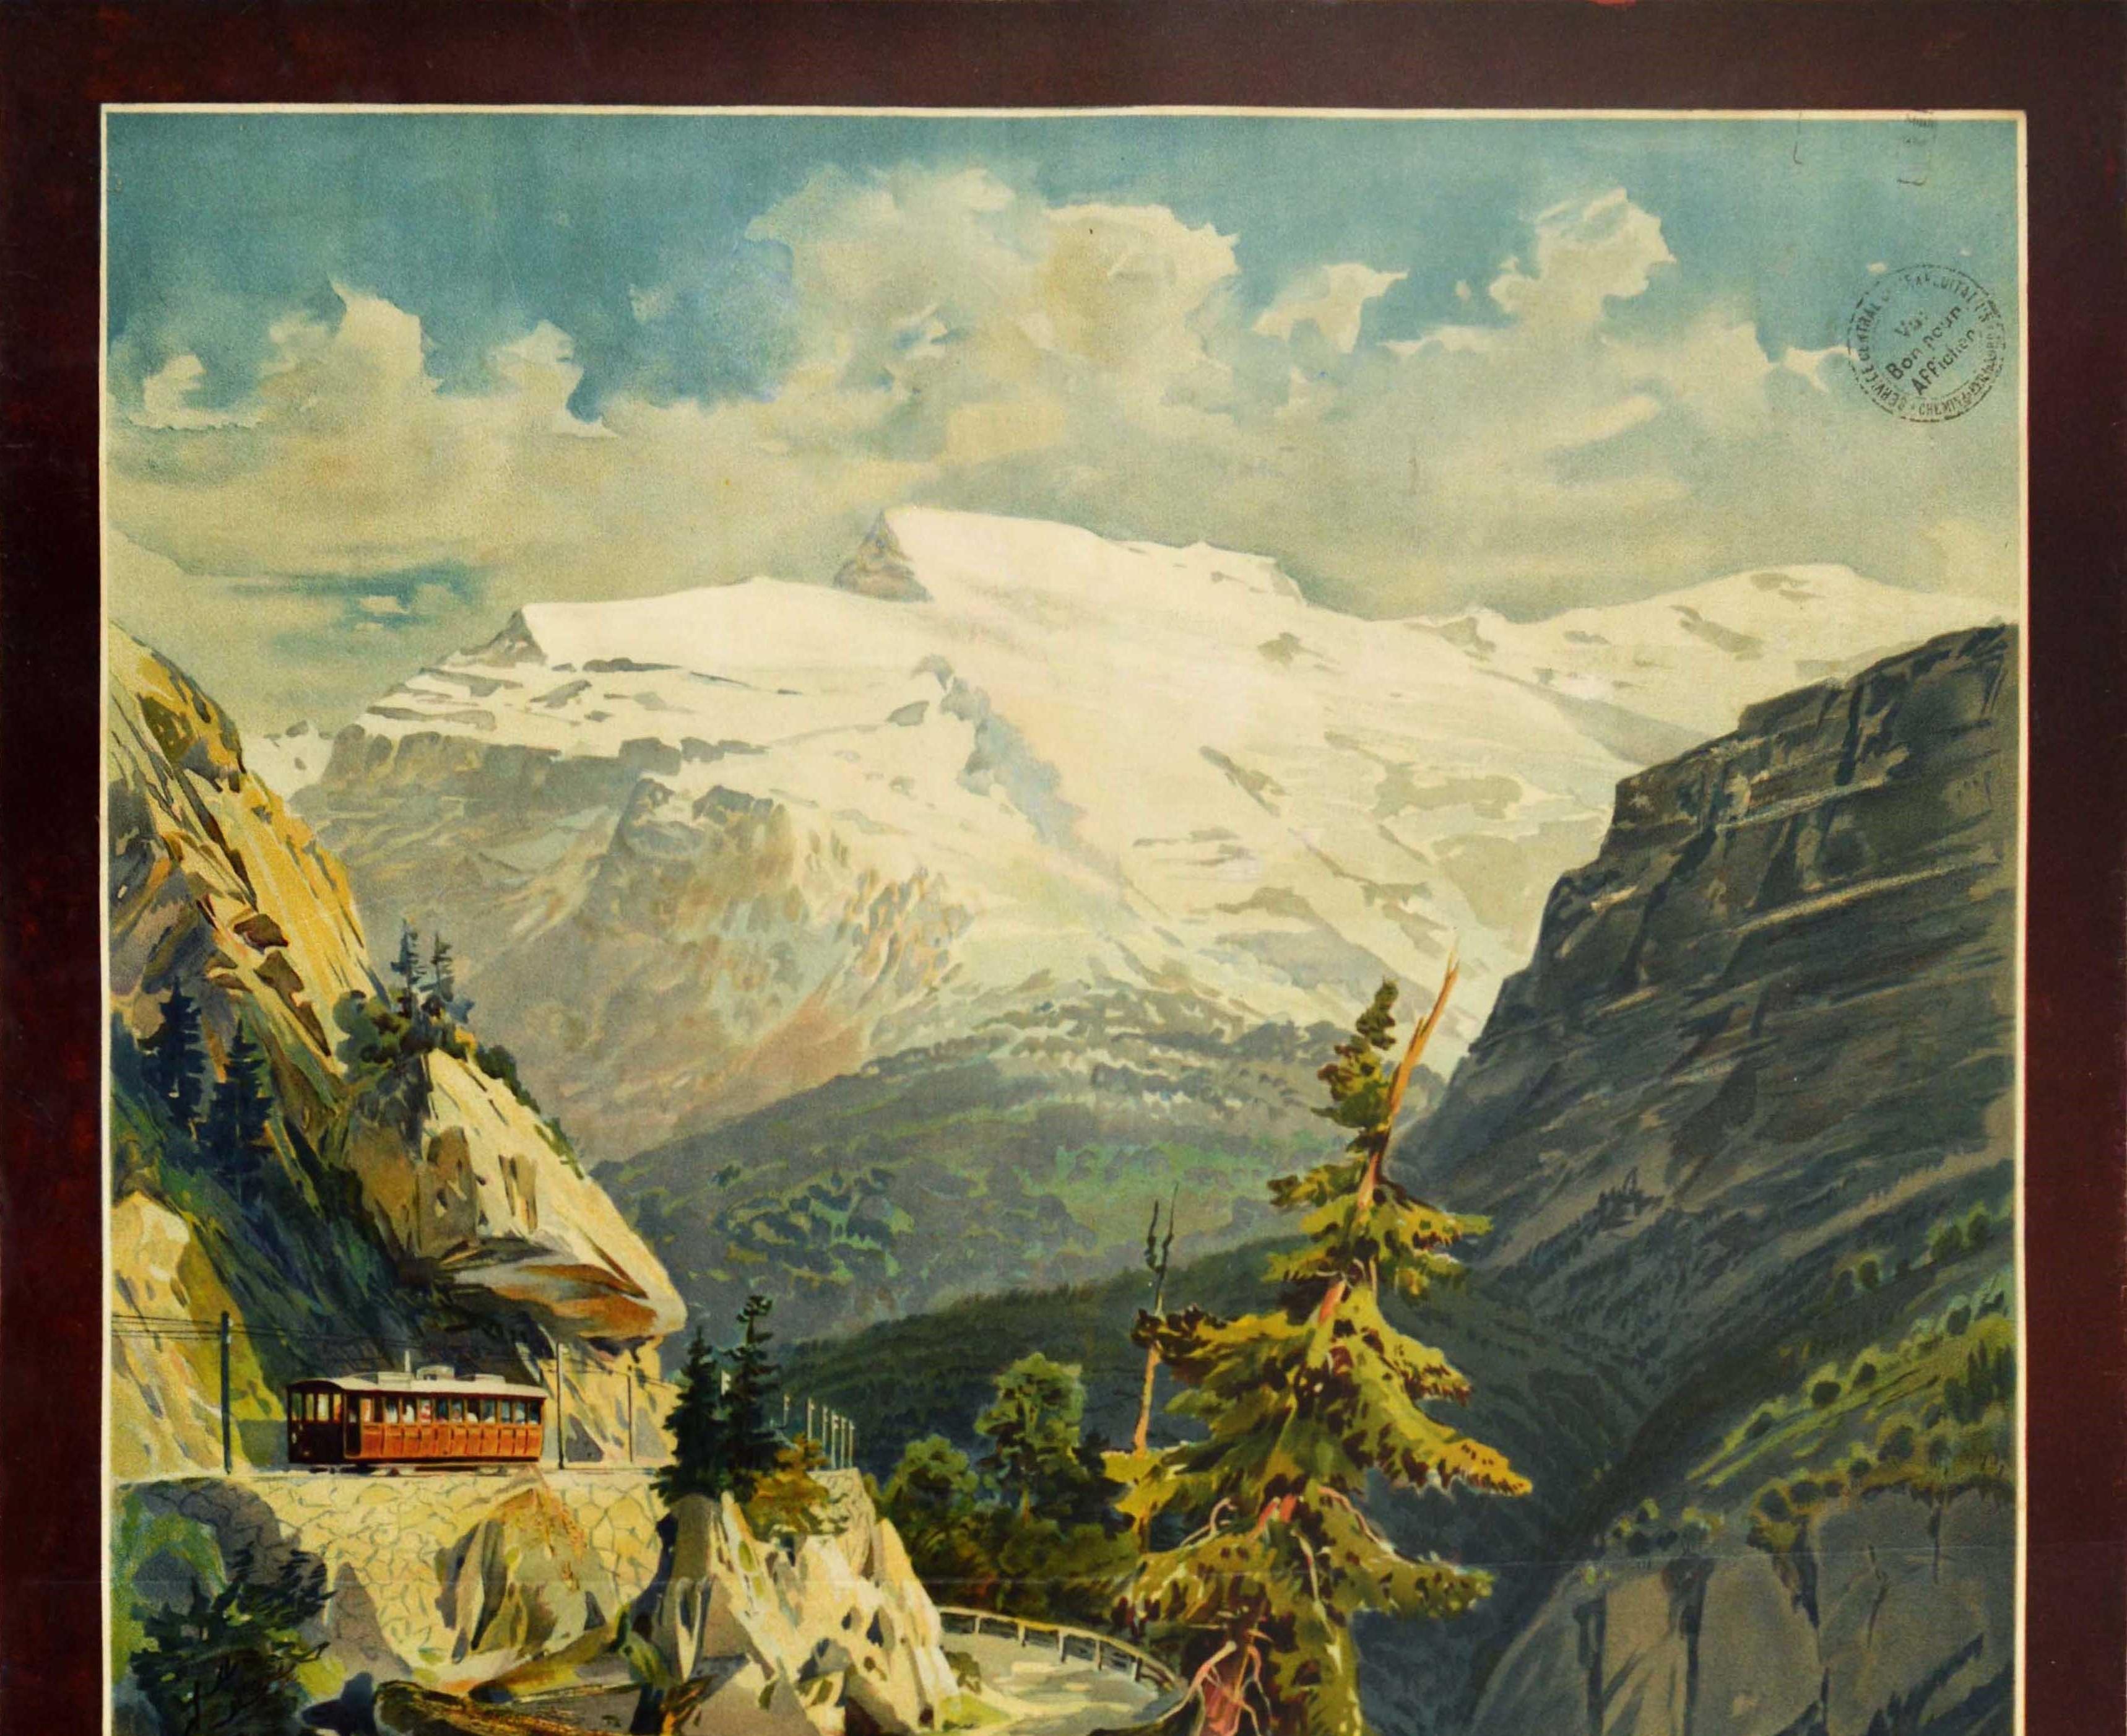 Original antique travel poster promoting the Stansstad Engelberg Bahn railway in Switzerland featuring a scenic painting by the Austrian artist and cartographer Anton Reckziegel (1865-1936) of a rocky mountain valley with a waterfall running through